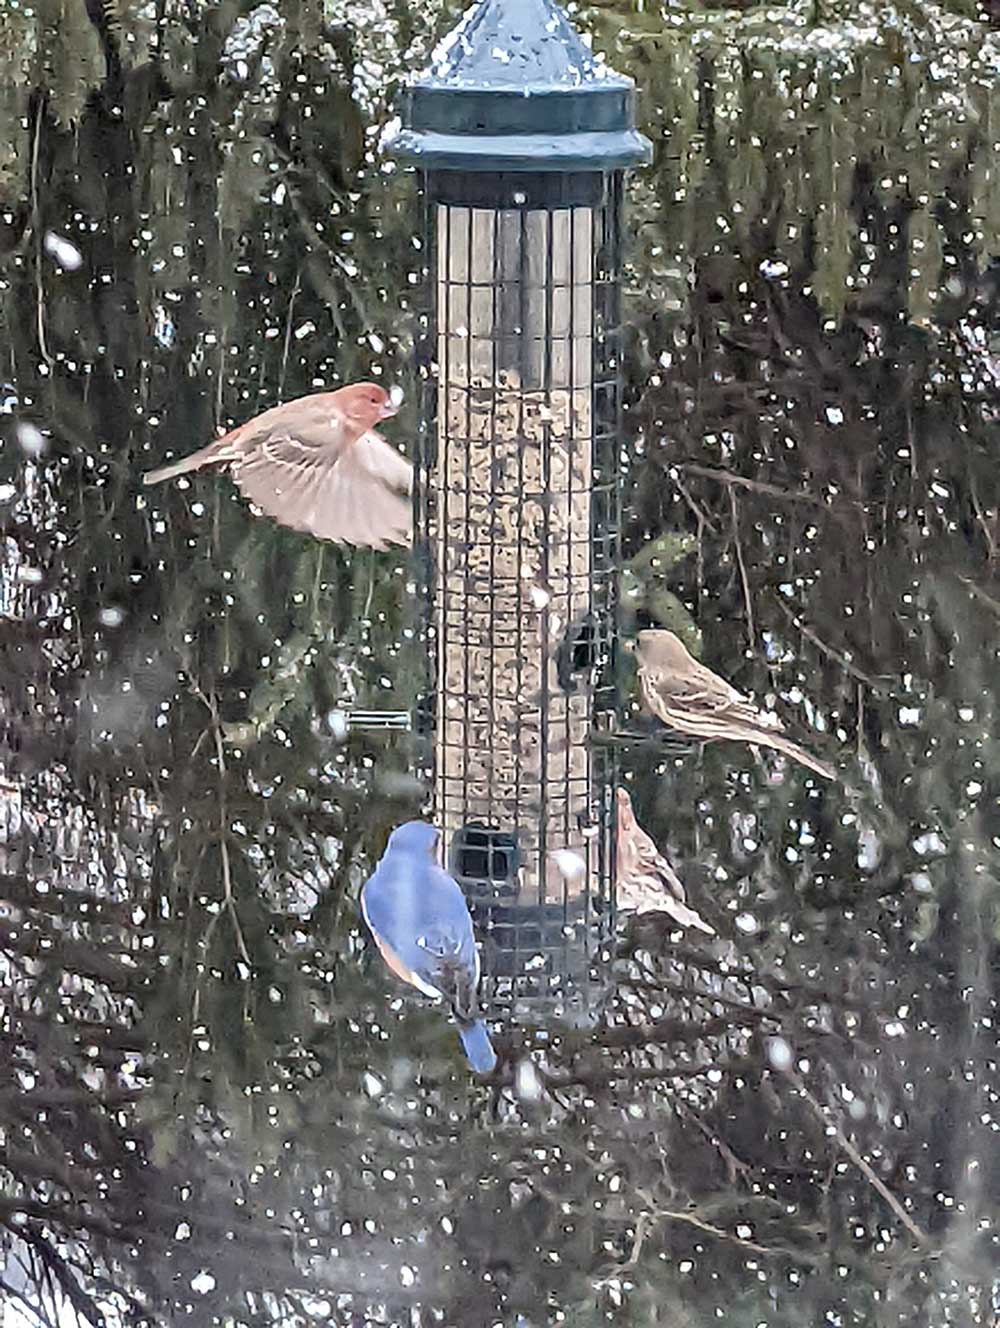 Birds flying and standing on bird feeder during snowstorm